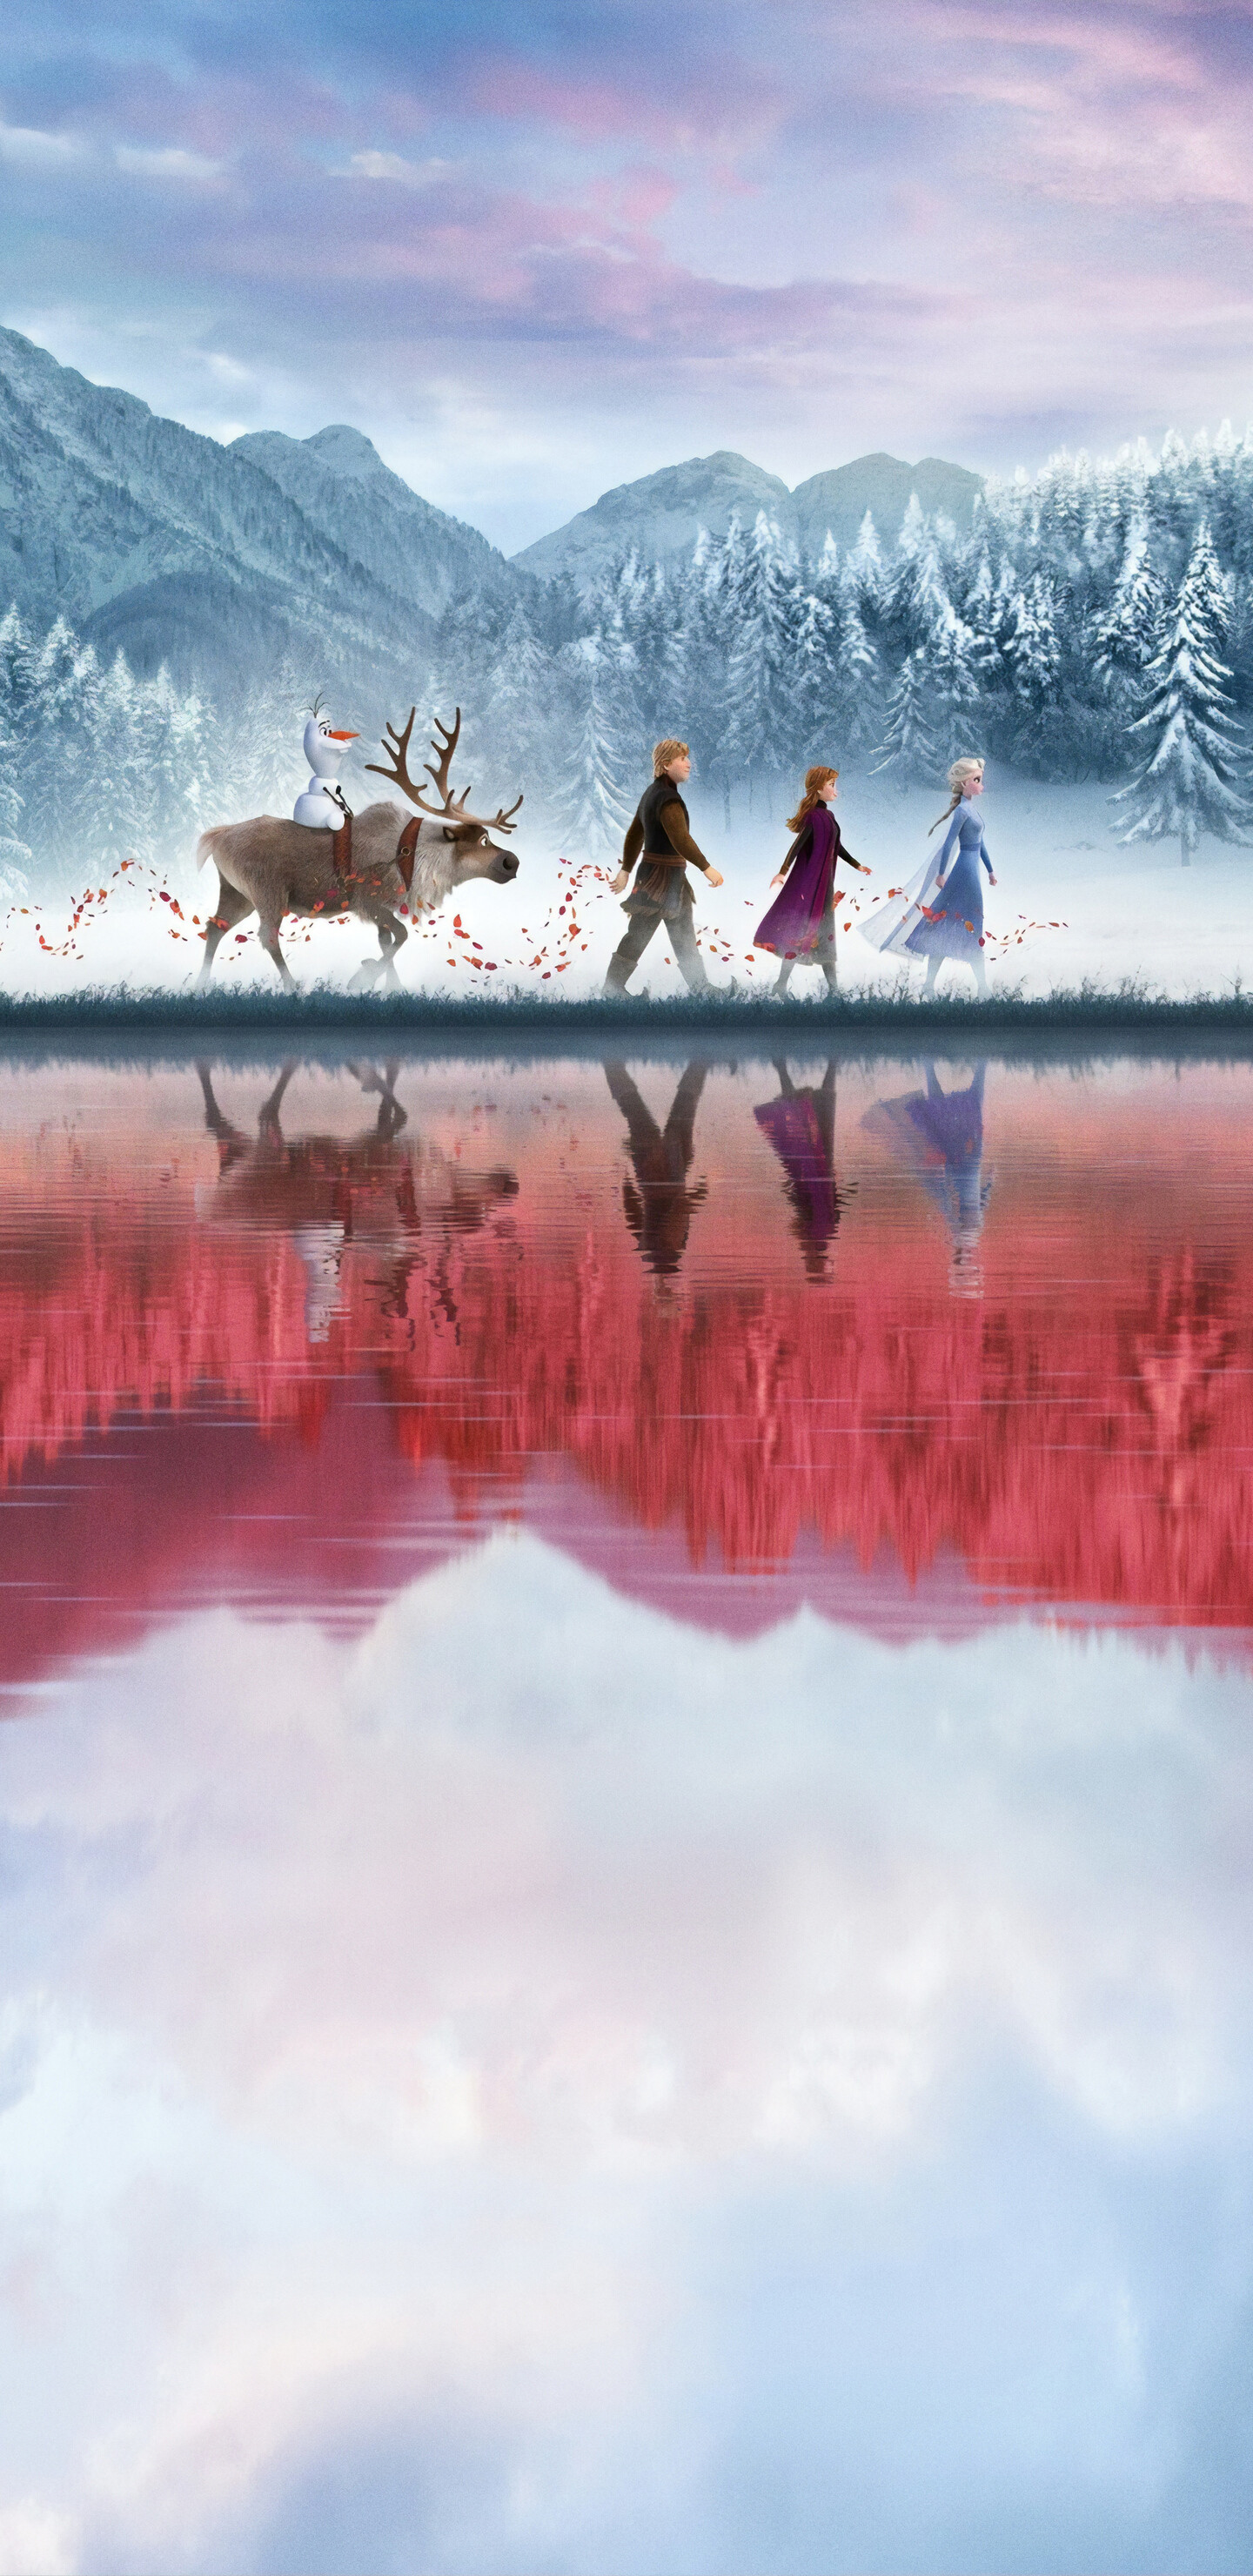 Frozen: A 2019 American computer-animated musical fantasy film produced by Walt Disney Animation Studios. 1440x2960 HD Background.